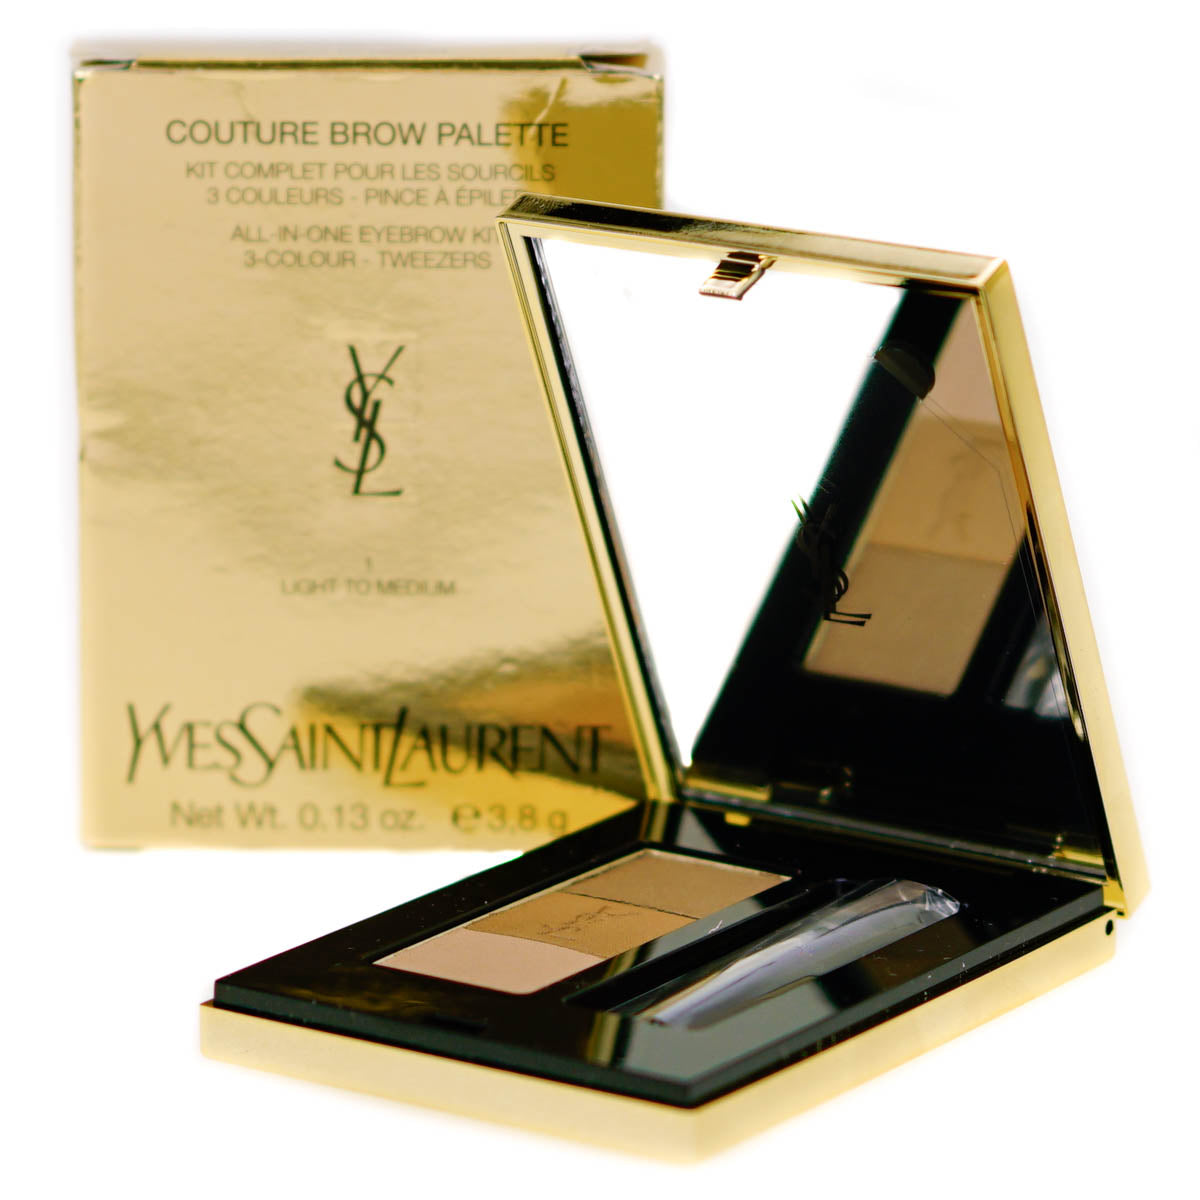 YSL Couture Eyebrow Palette 1 Light to Medium (Blemished Box)